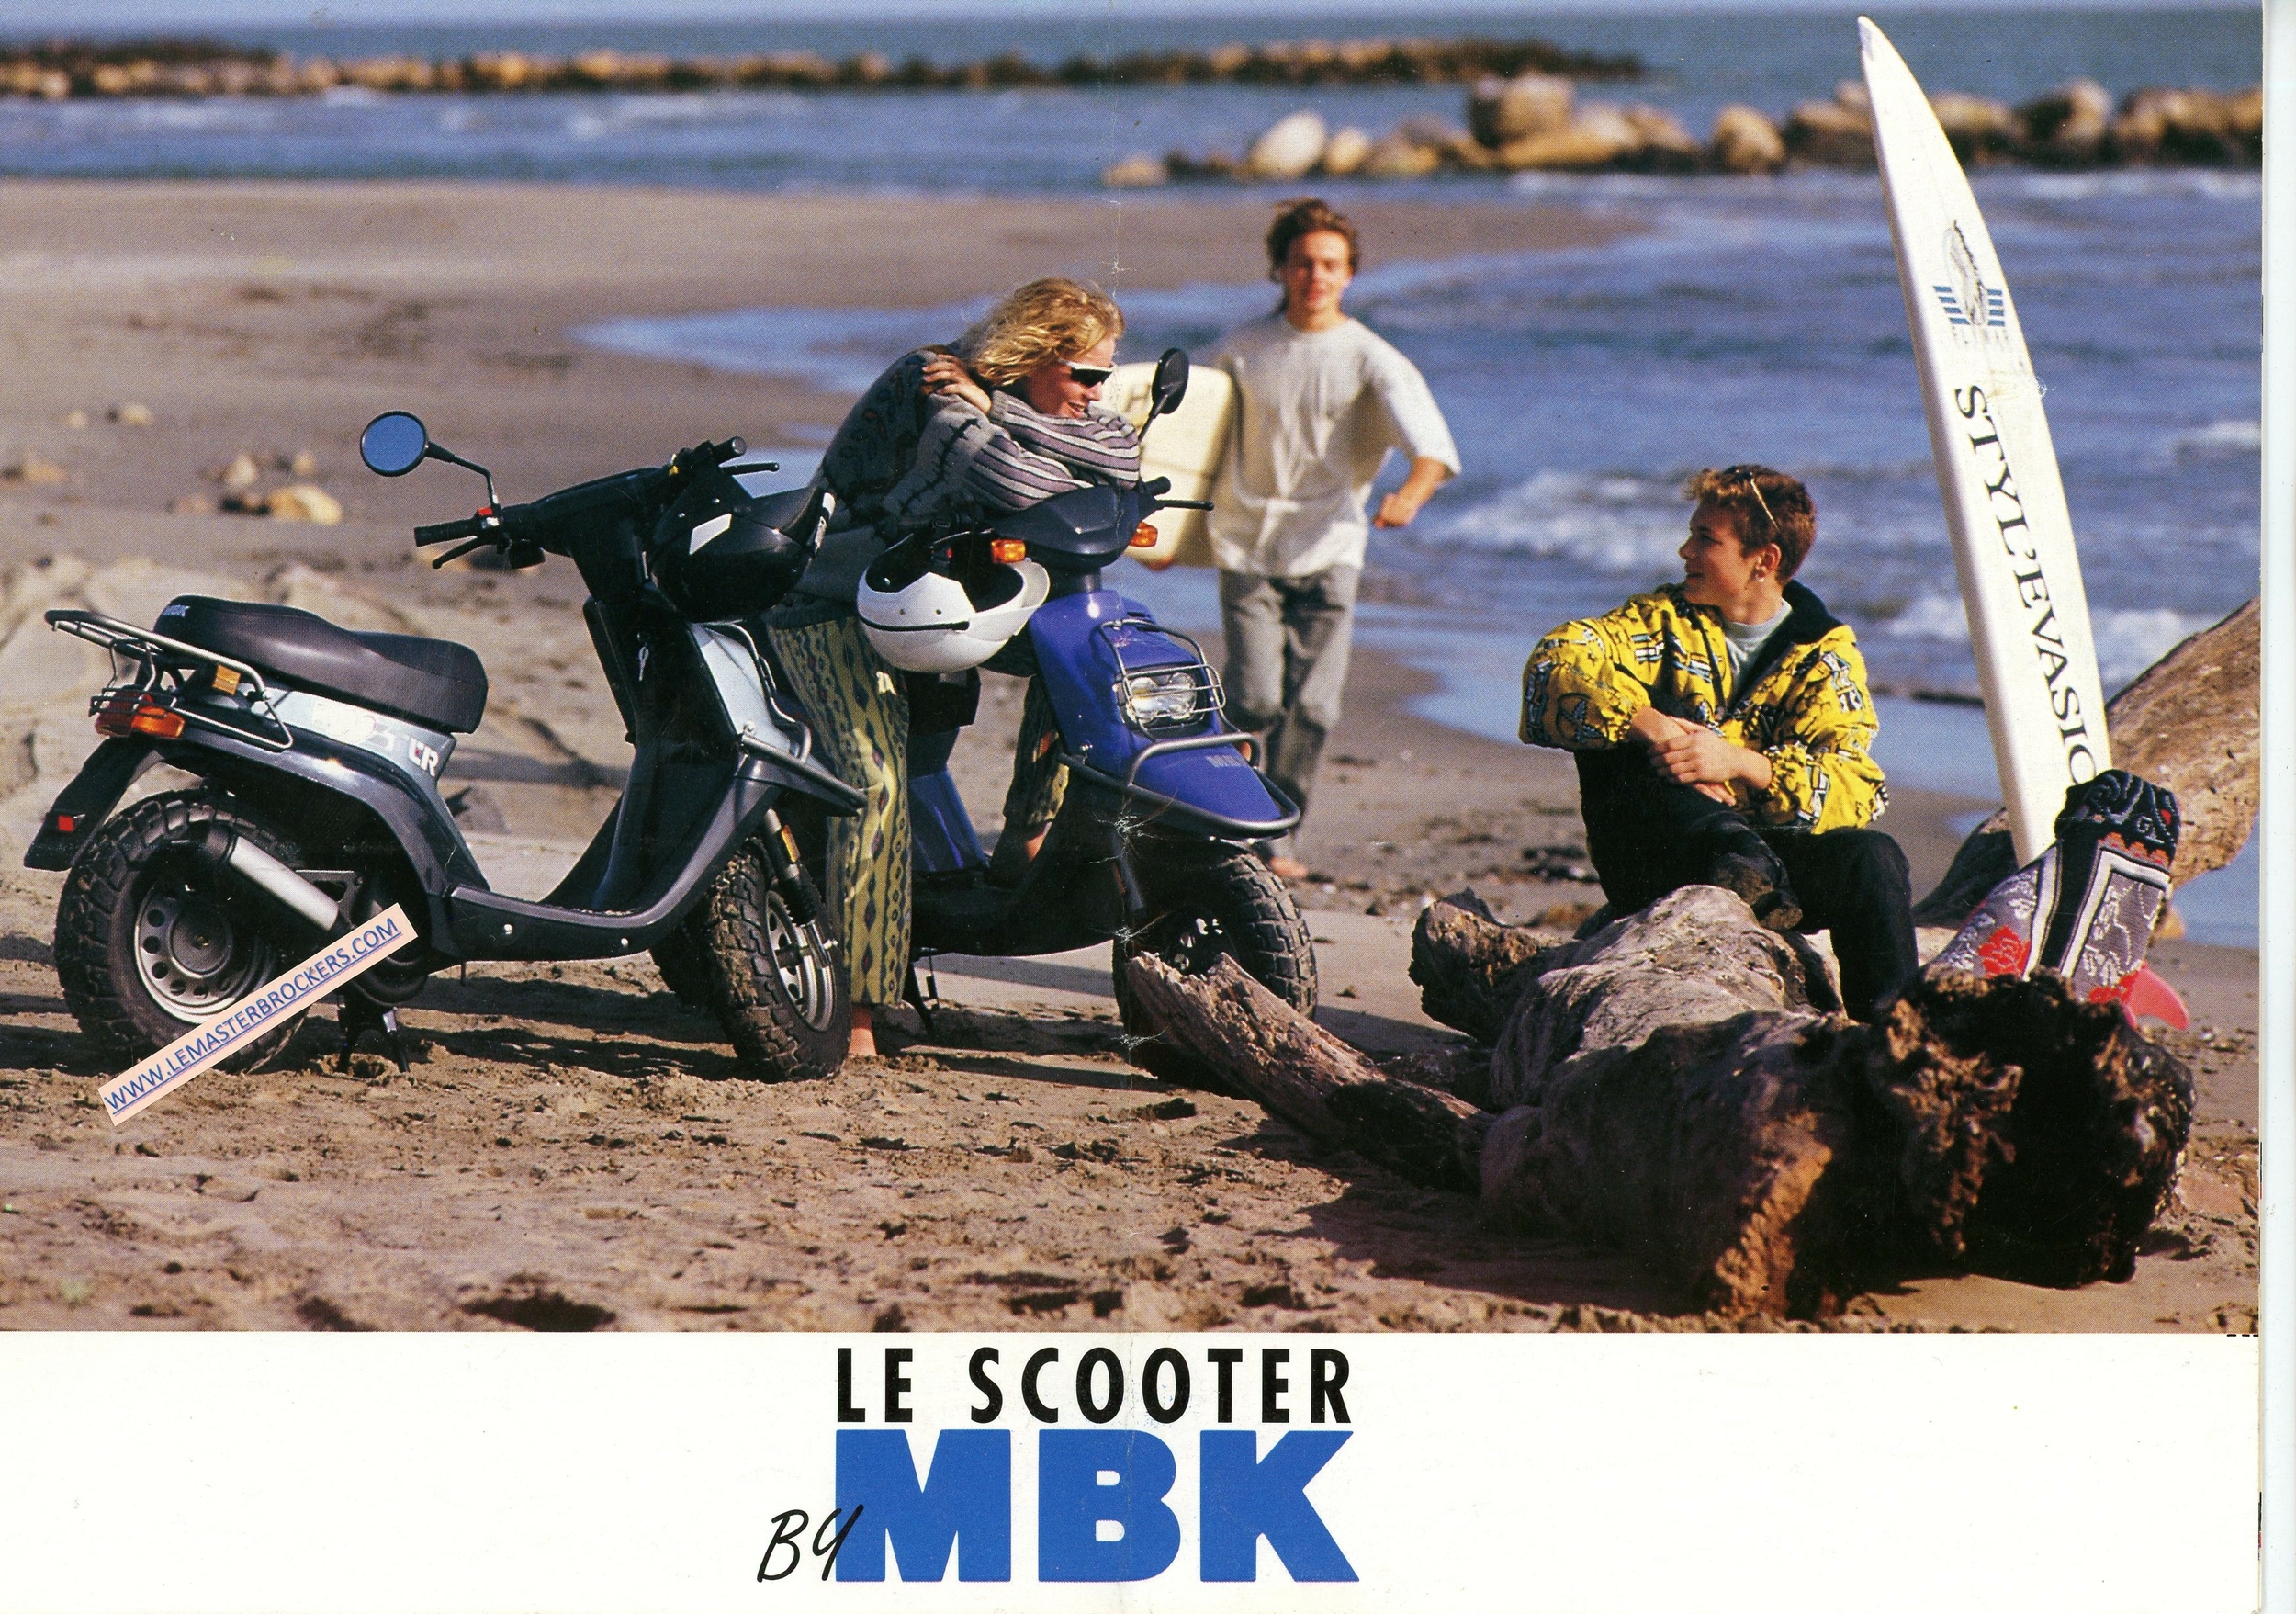 BROCHURE-SCOOTER-MBK-BOOSTER-HOT-CHAMP-ACTIVE-50-80-125-LEMASTERBROCKERS